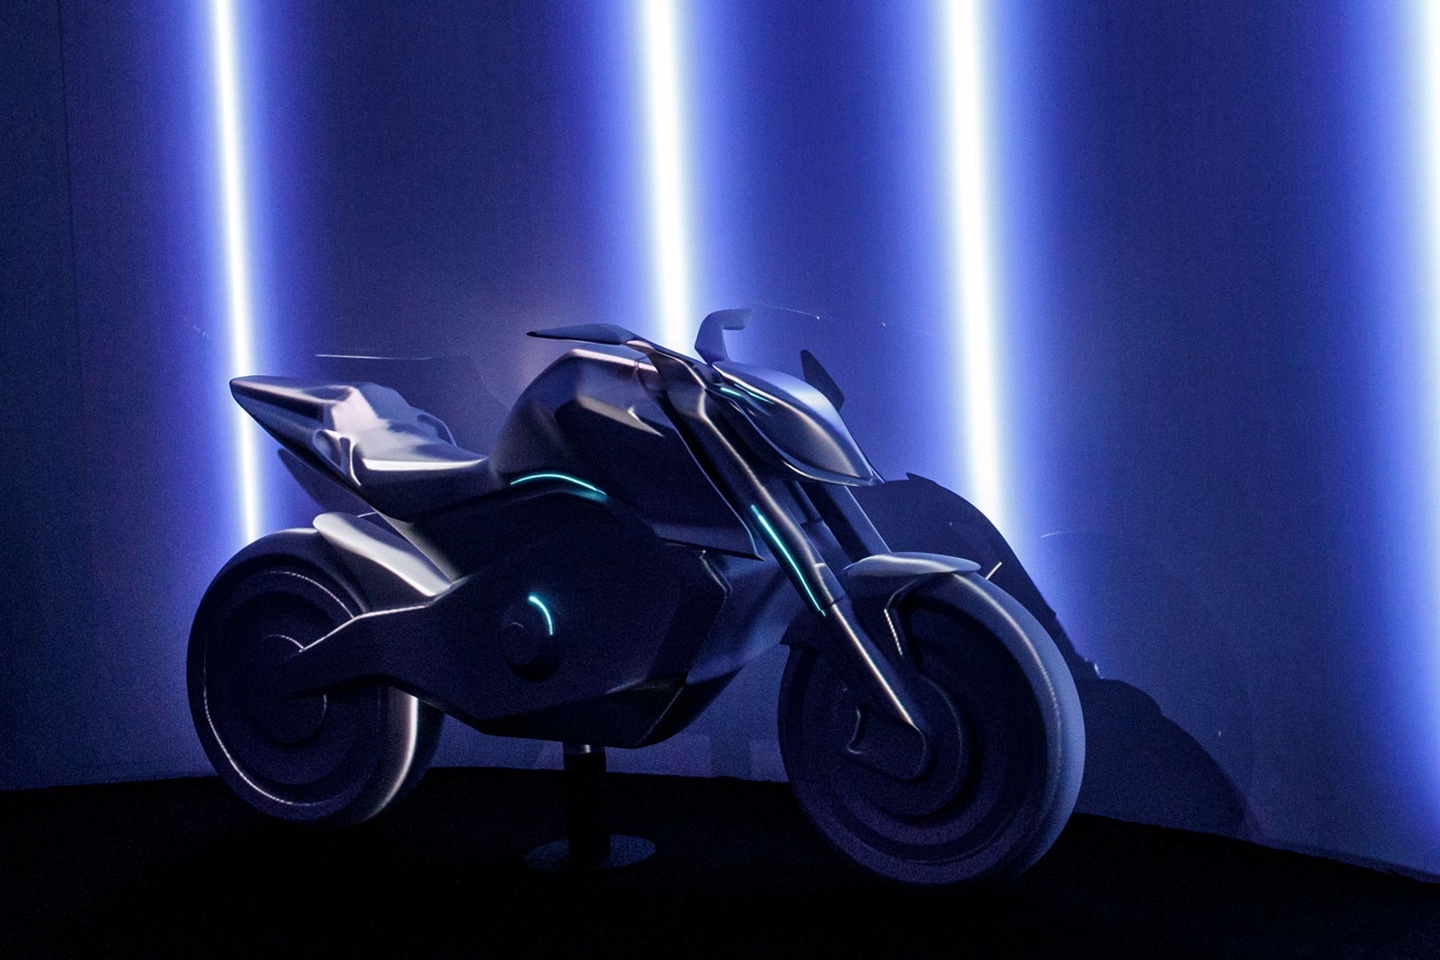 A view of the new Honda Hornet concept motorcycle, featured just recently at this year's EICMA